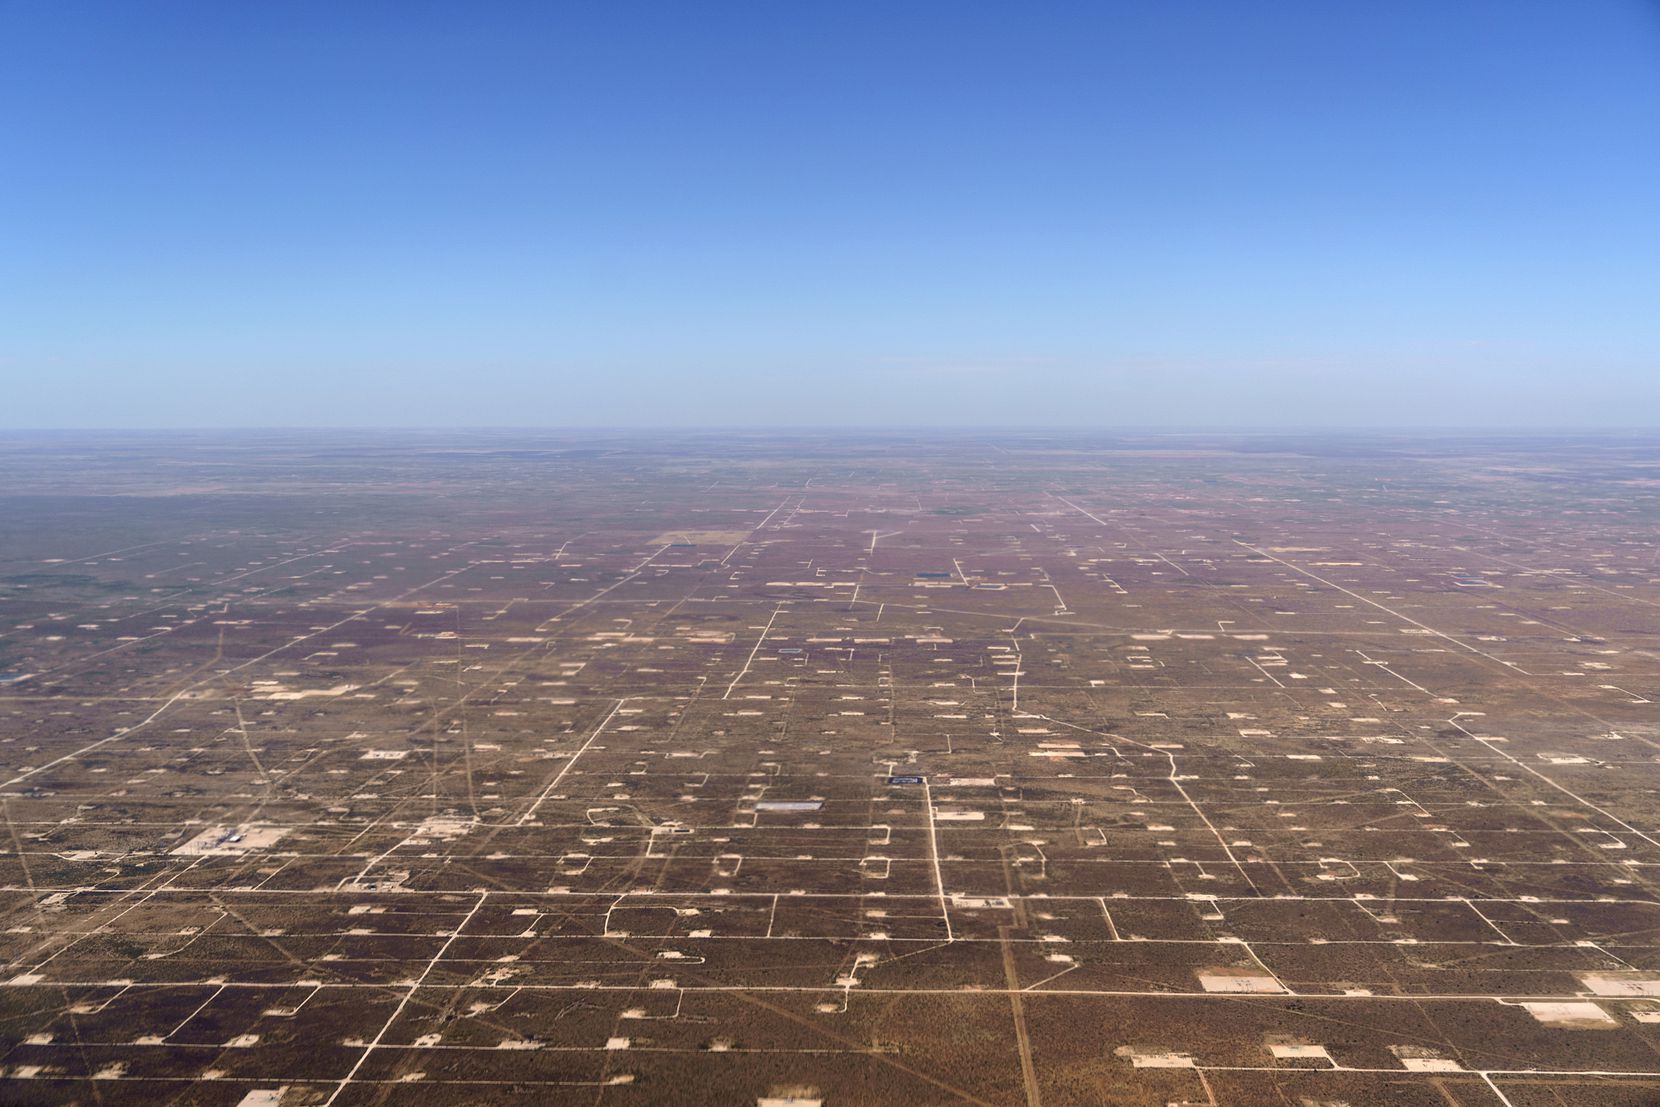 Patches of land housing oil pumpjacks dot the landscape of the Permian Basin in Midland....